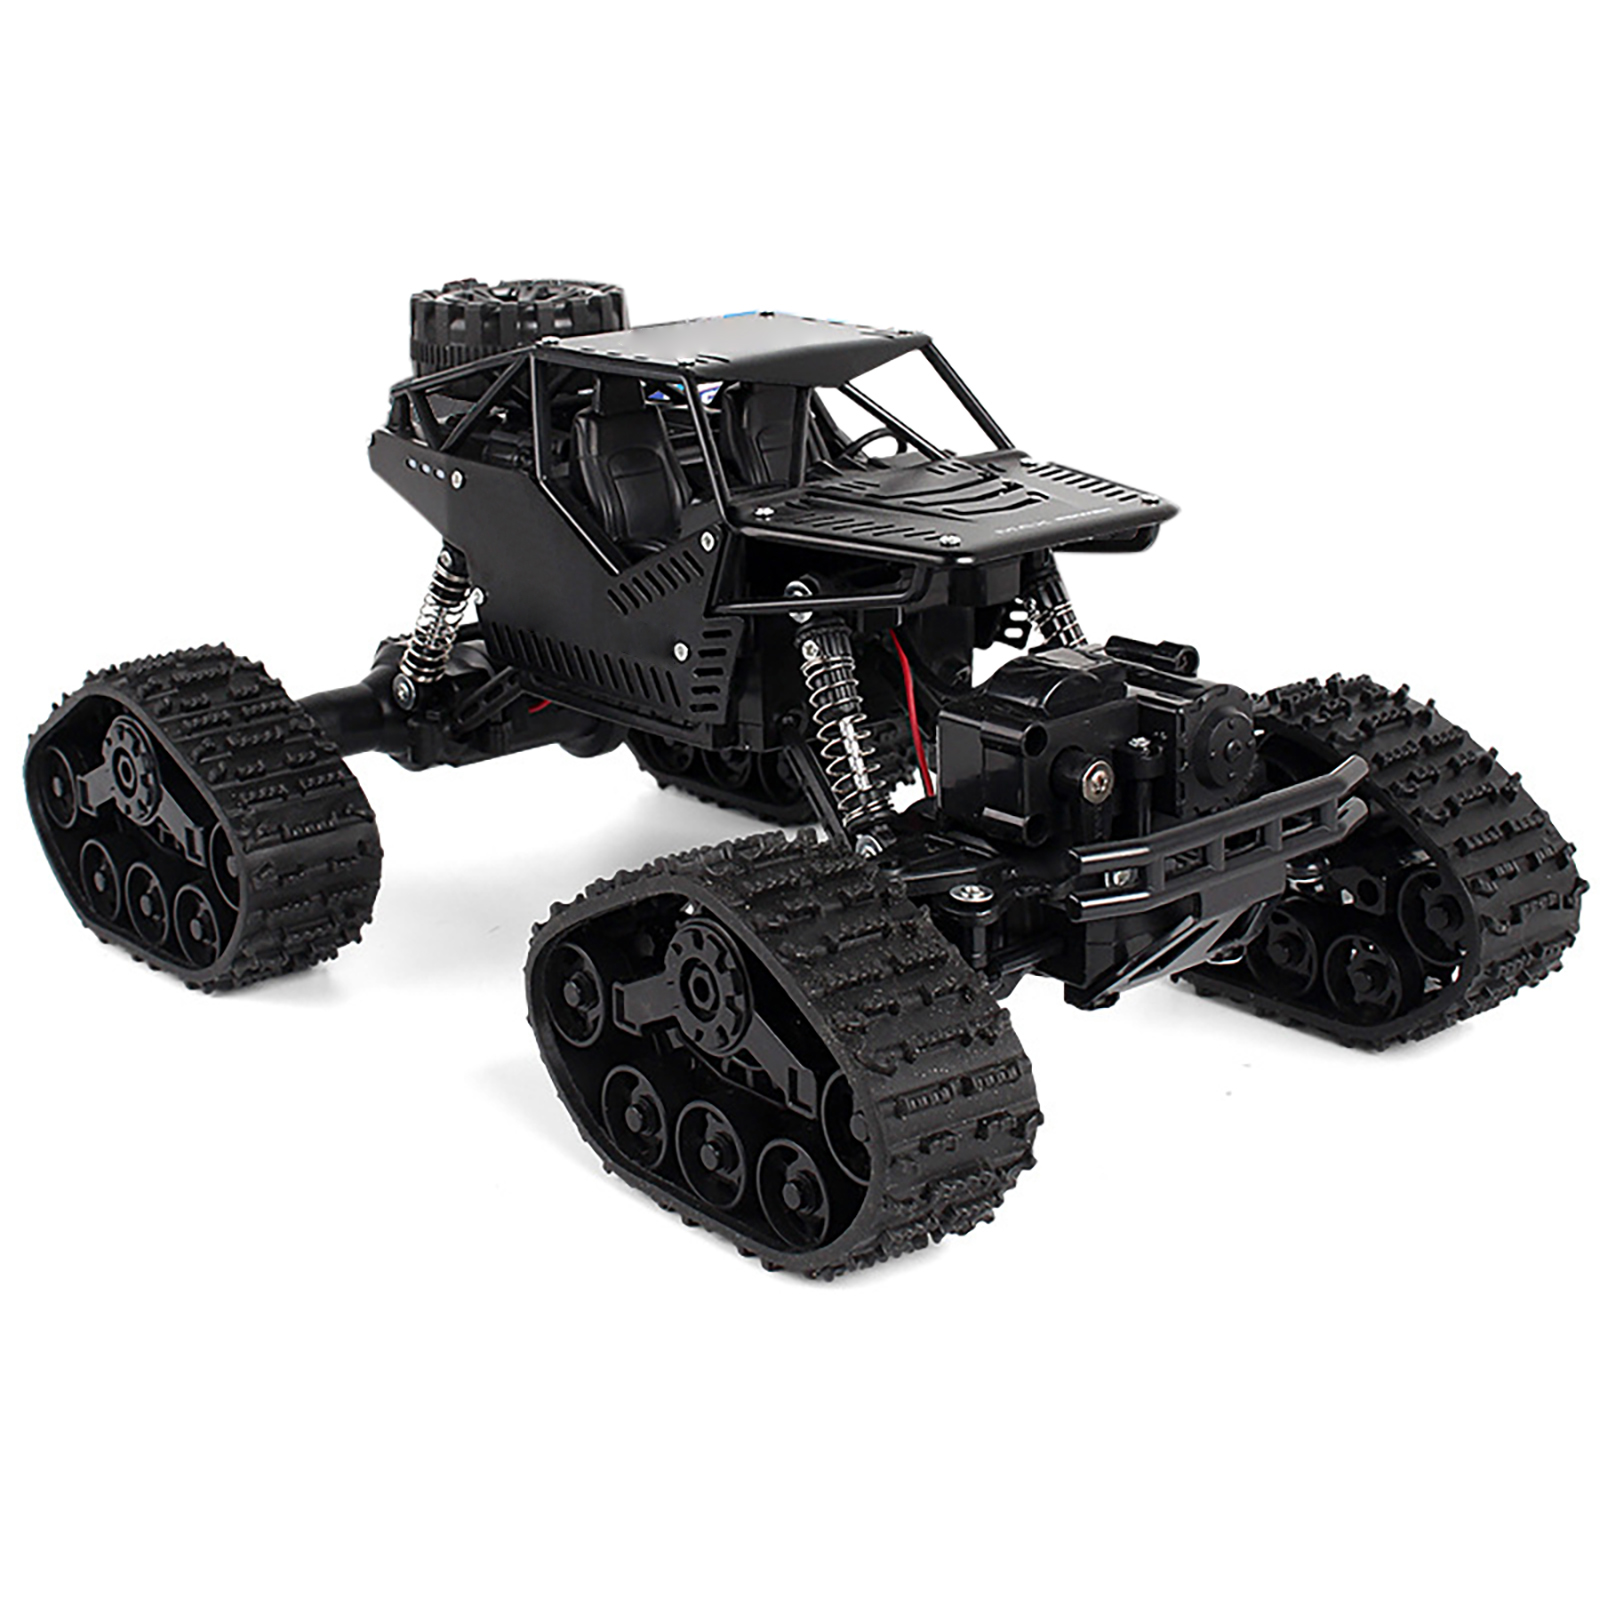 1:16 2.4ghz RC Car Alloy Off-Road Buggy 4wd 15km/H High Speed Off-Road Vehicle Remote Control Climbing Car